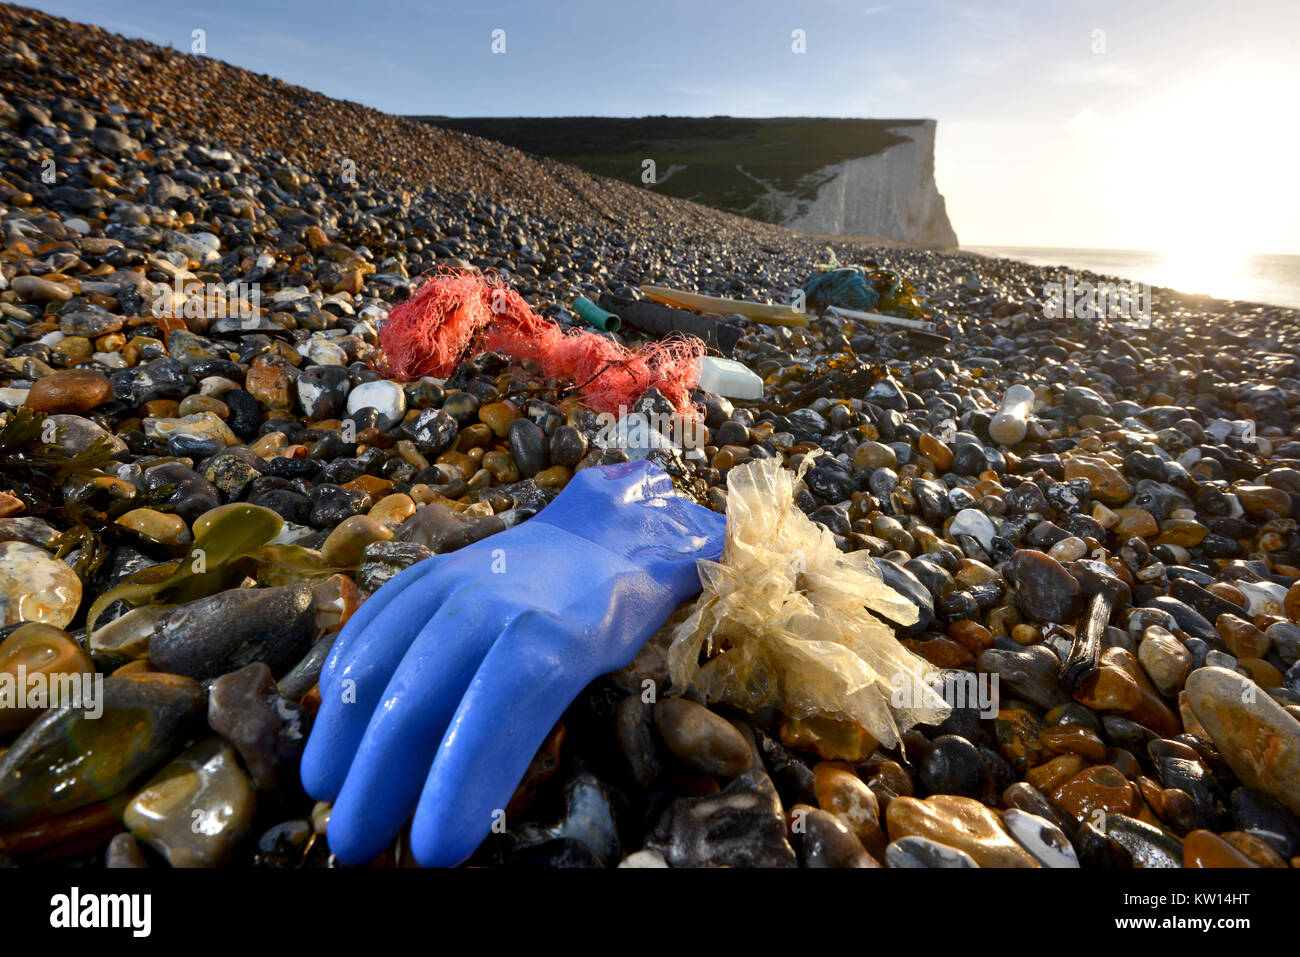 Plastic and rubbish washed up on a beach near the iconic Seven Sisters chalk cliffs in southern England, Cuckmere Haven, East Sussex, UK. Stock Photo